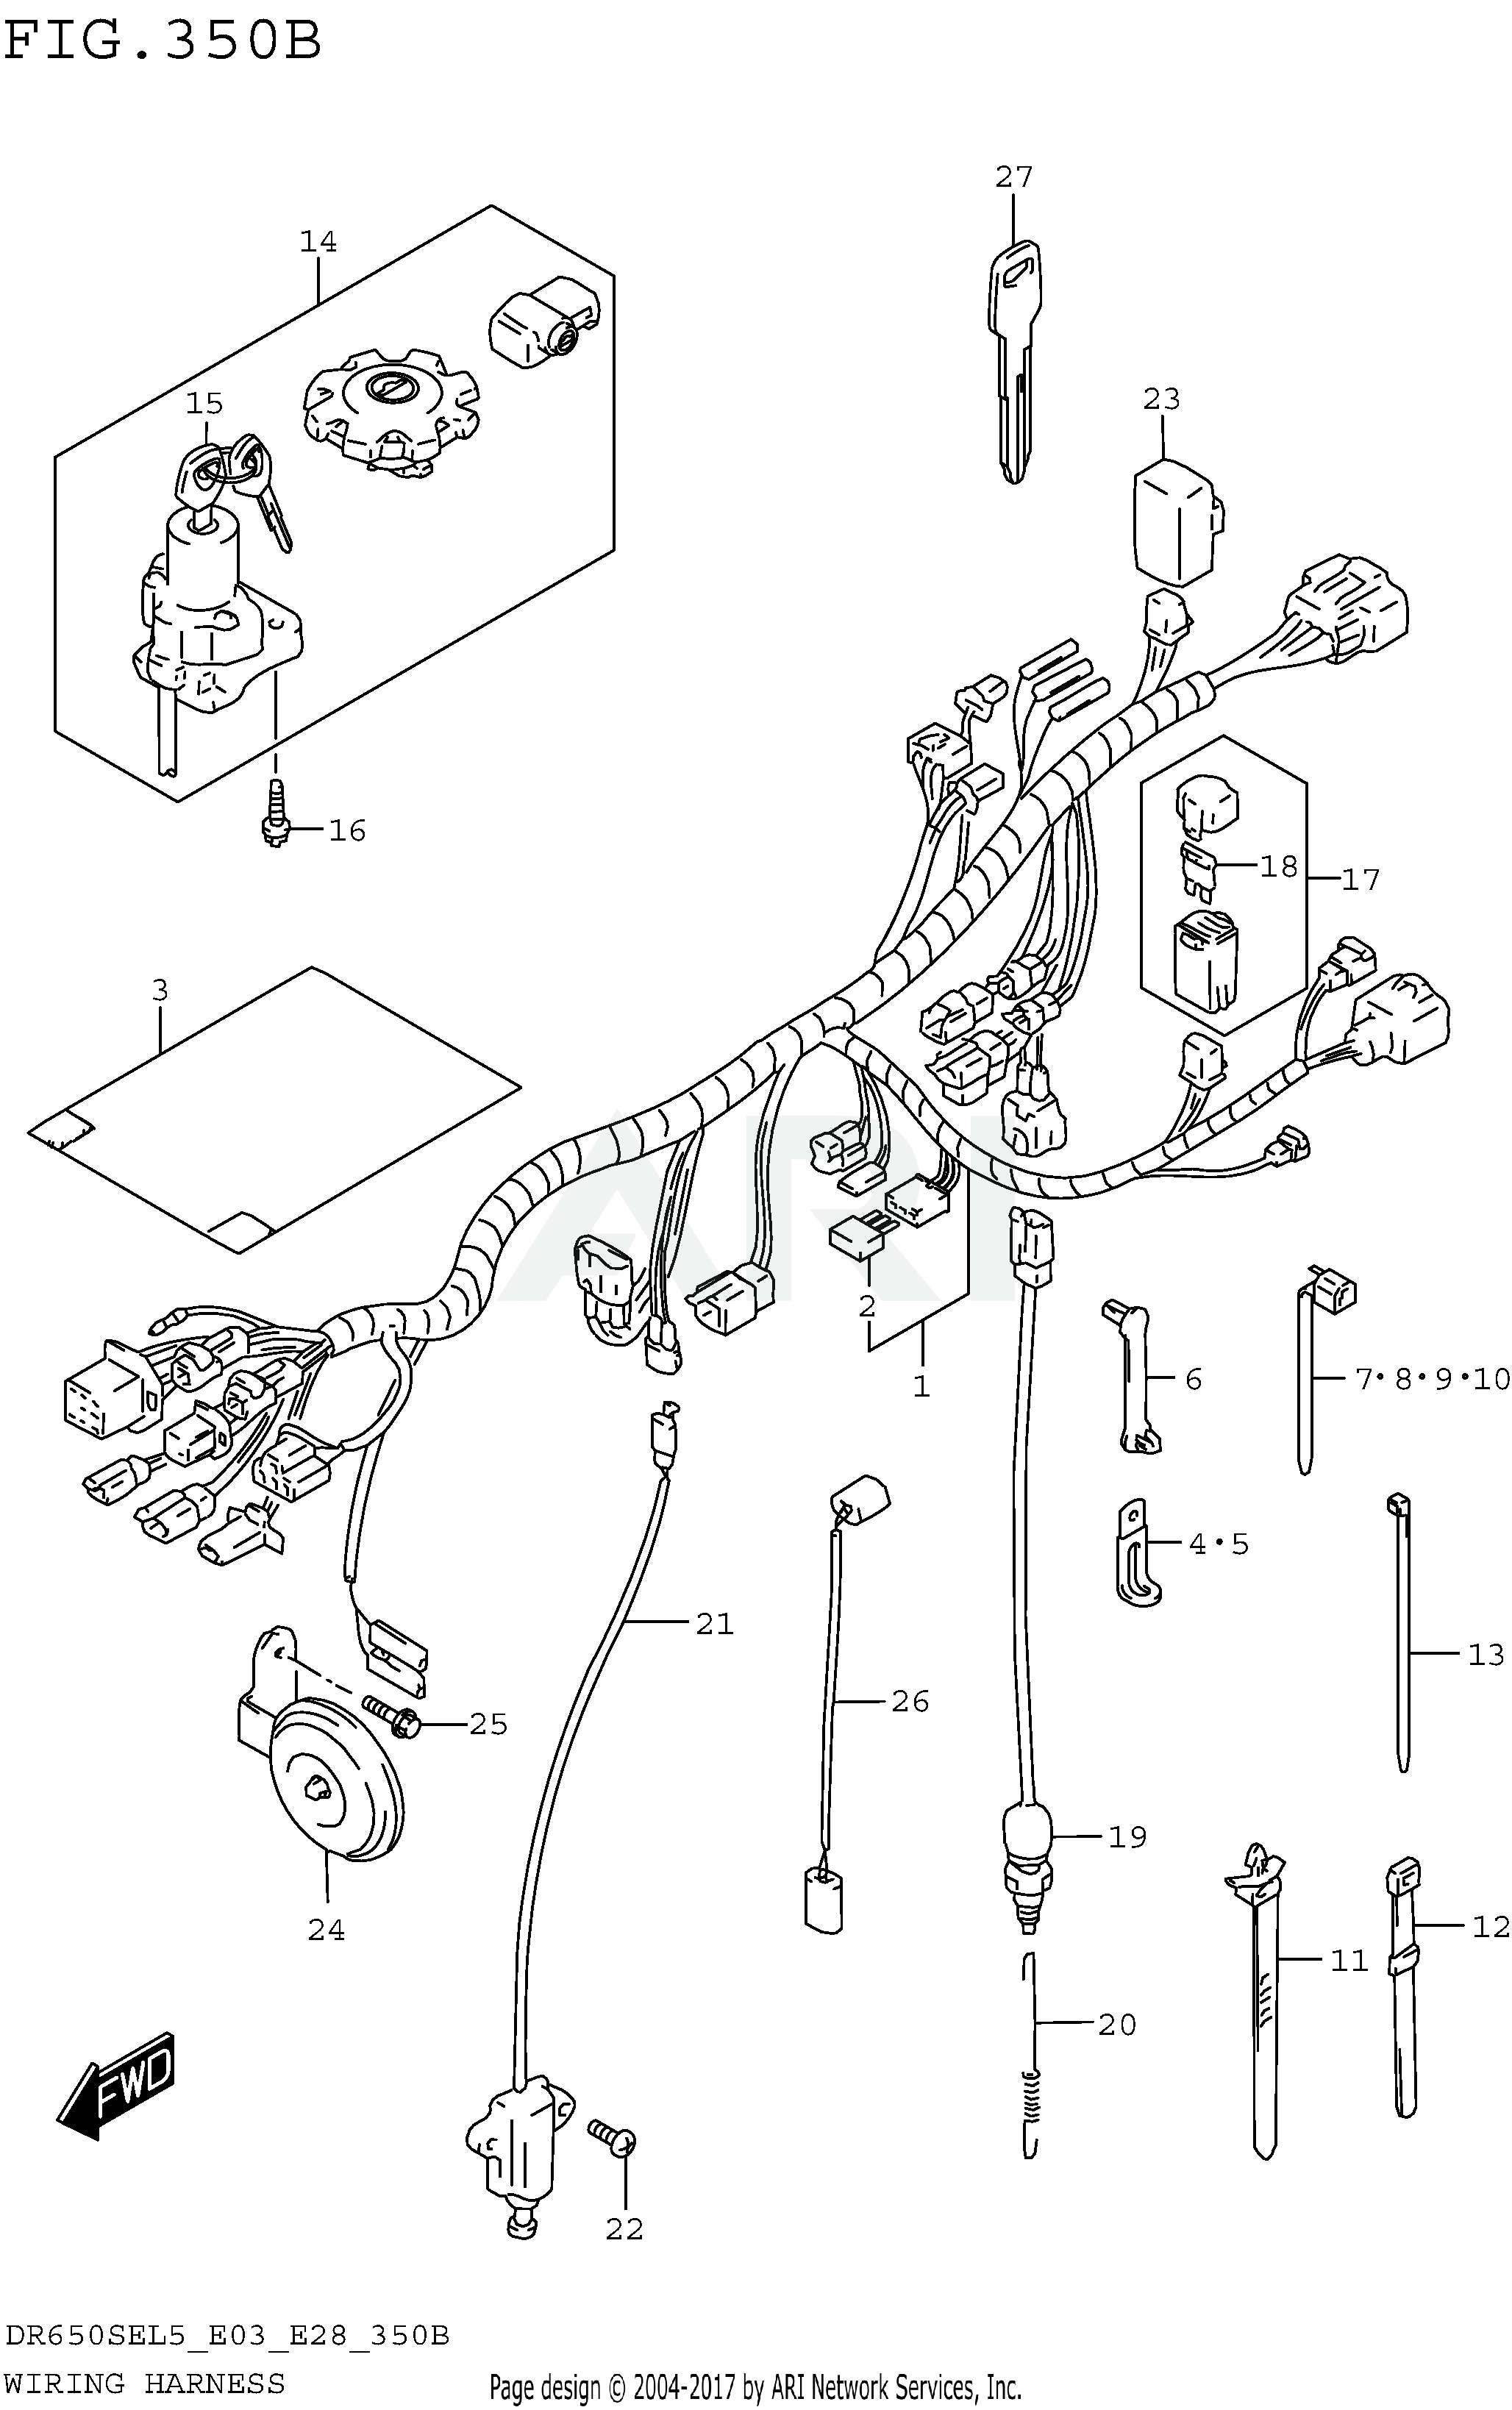 WIRING HARNESS (DR650SEL5 E28)